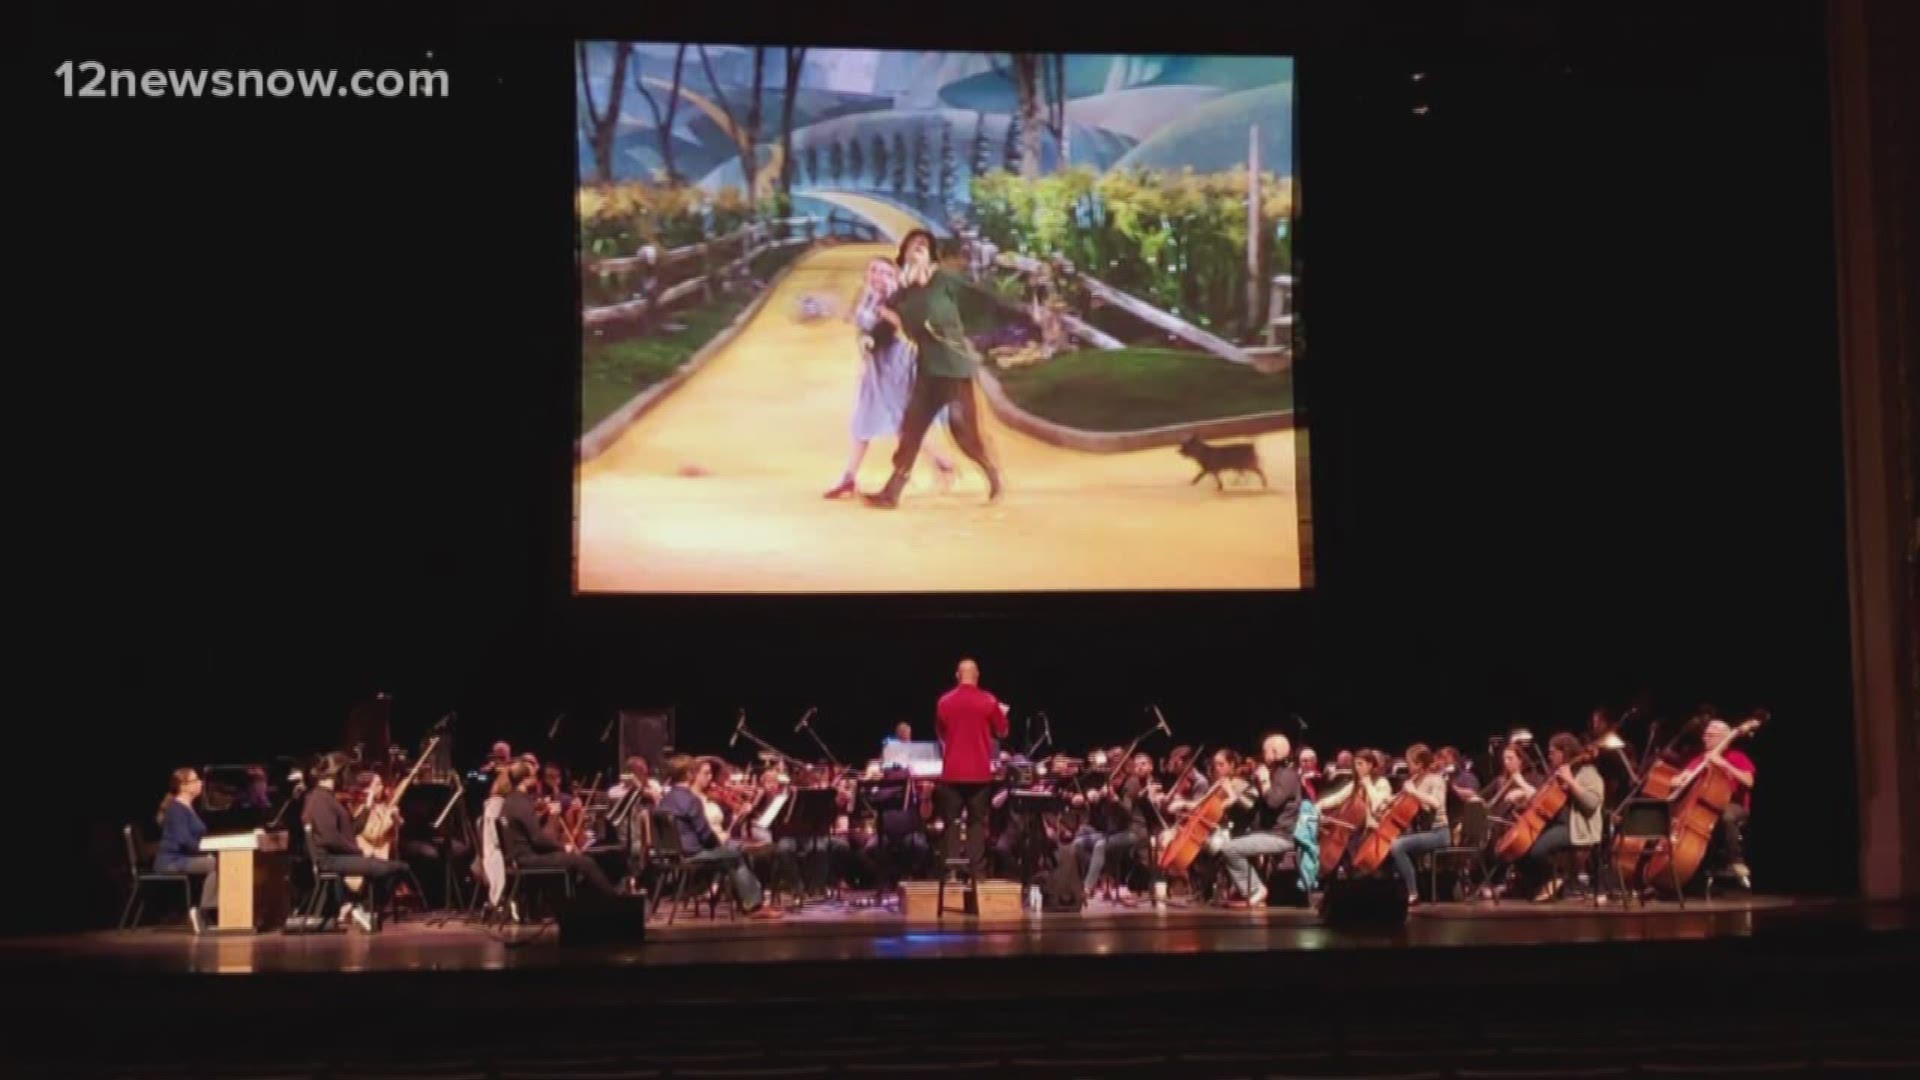 The classic movie will be shown above the orchestra. While the movie plays with only lyrics and dialogue, the symphony will play the music live.